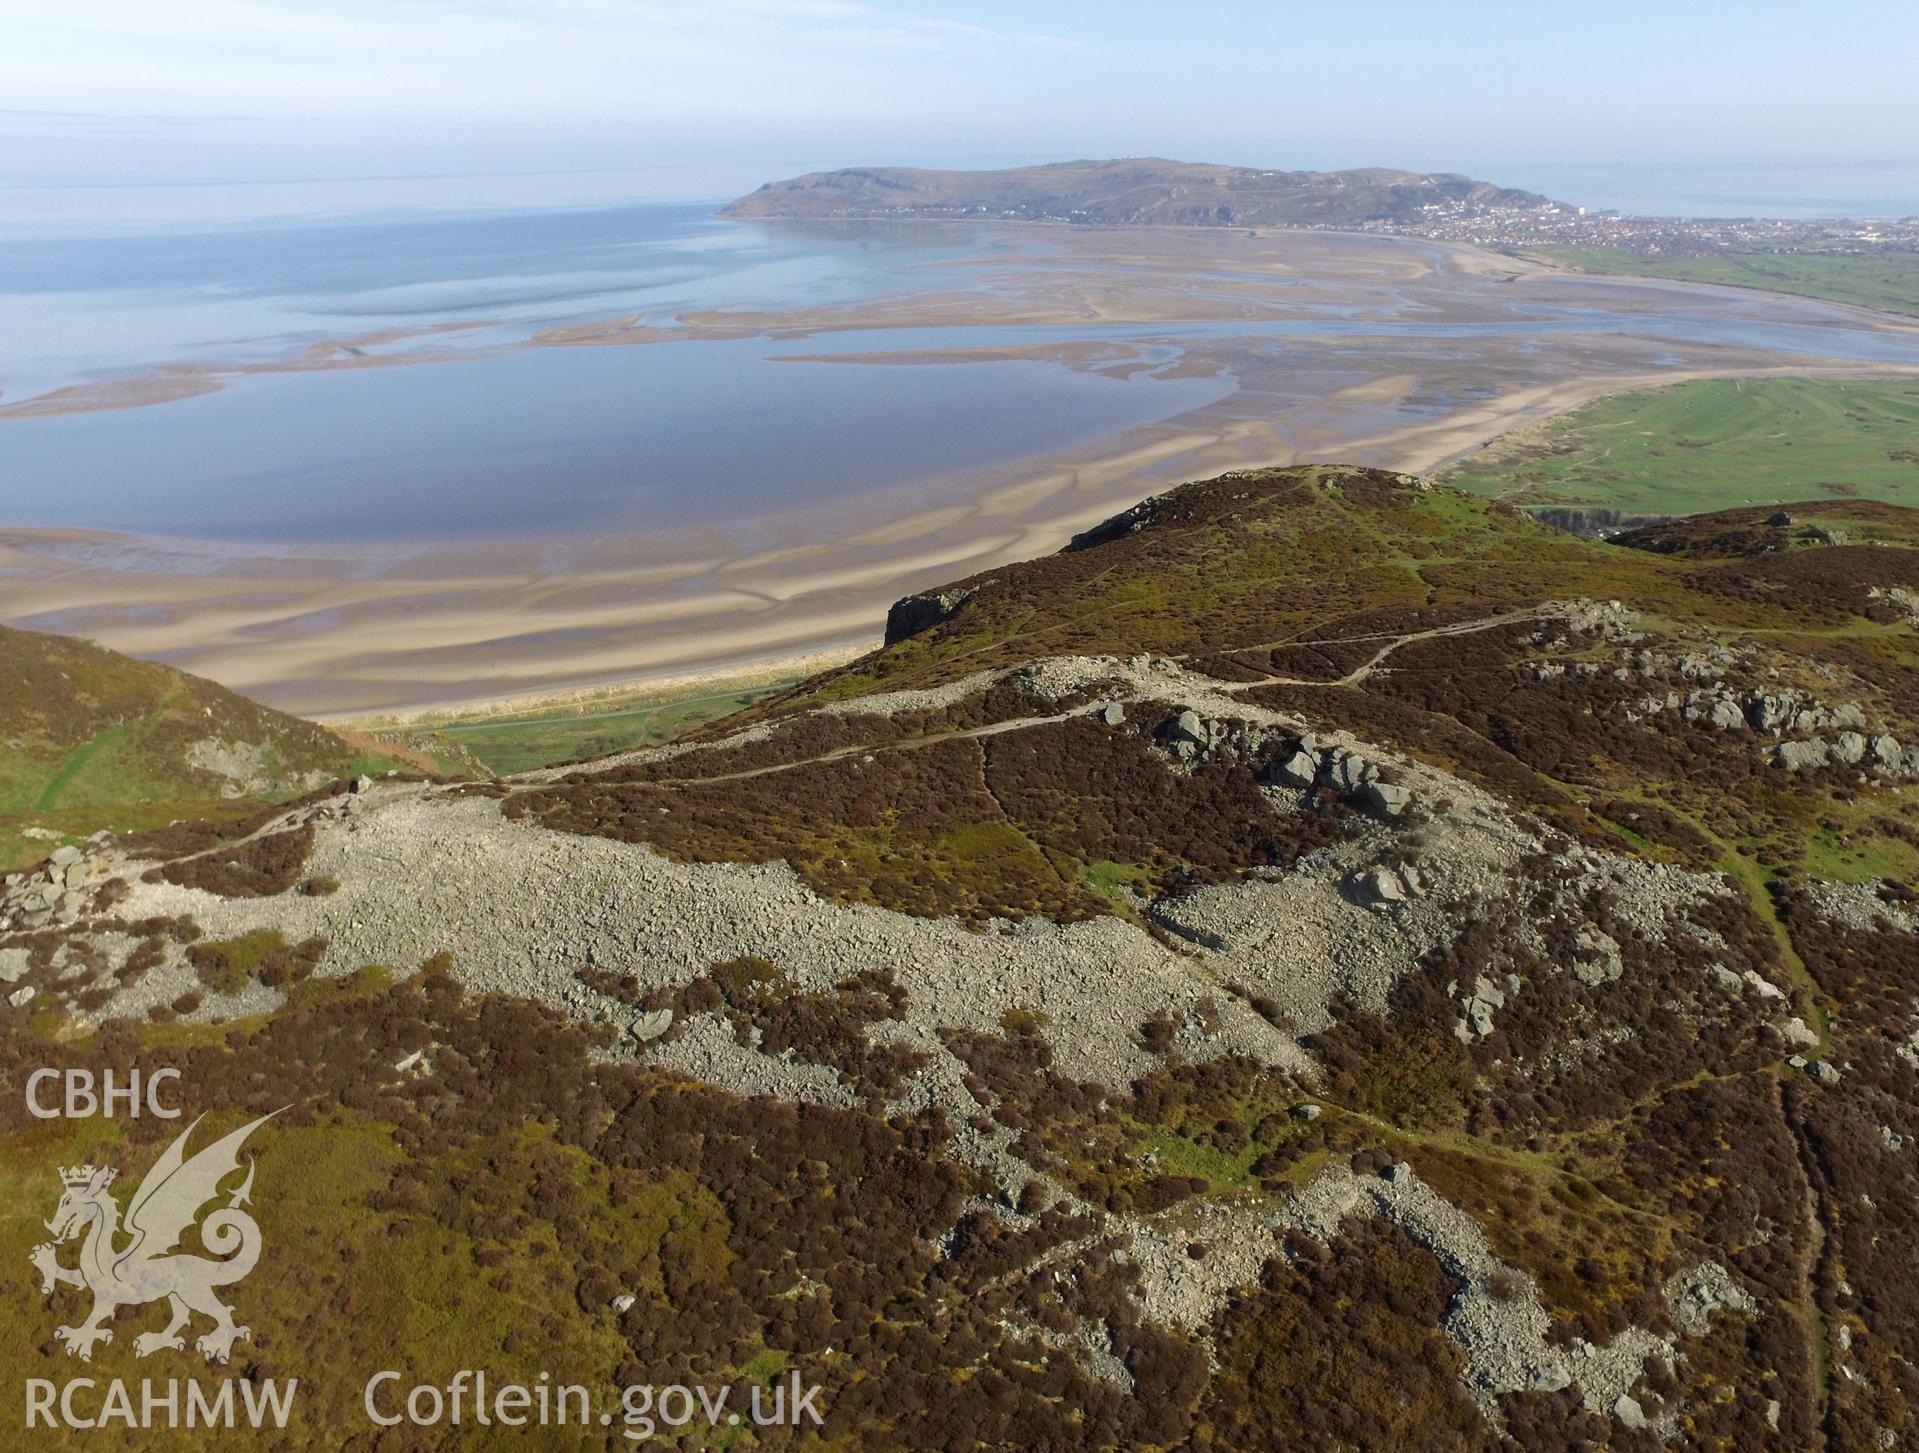 Colour photo showing view of Castell Caer Seion, Conwy Mountain, taken by Paul R. Davis, 19th April 2018.